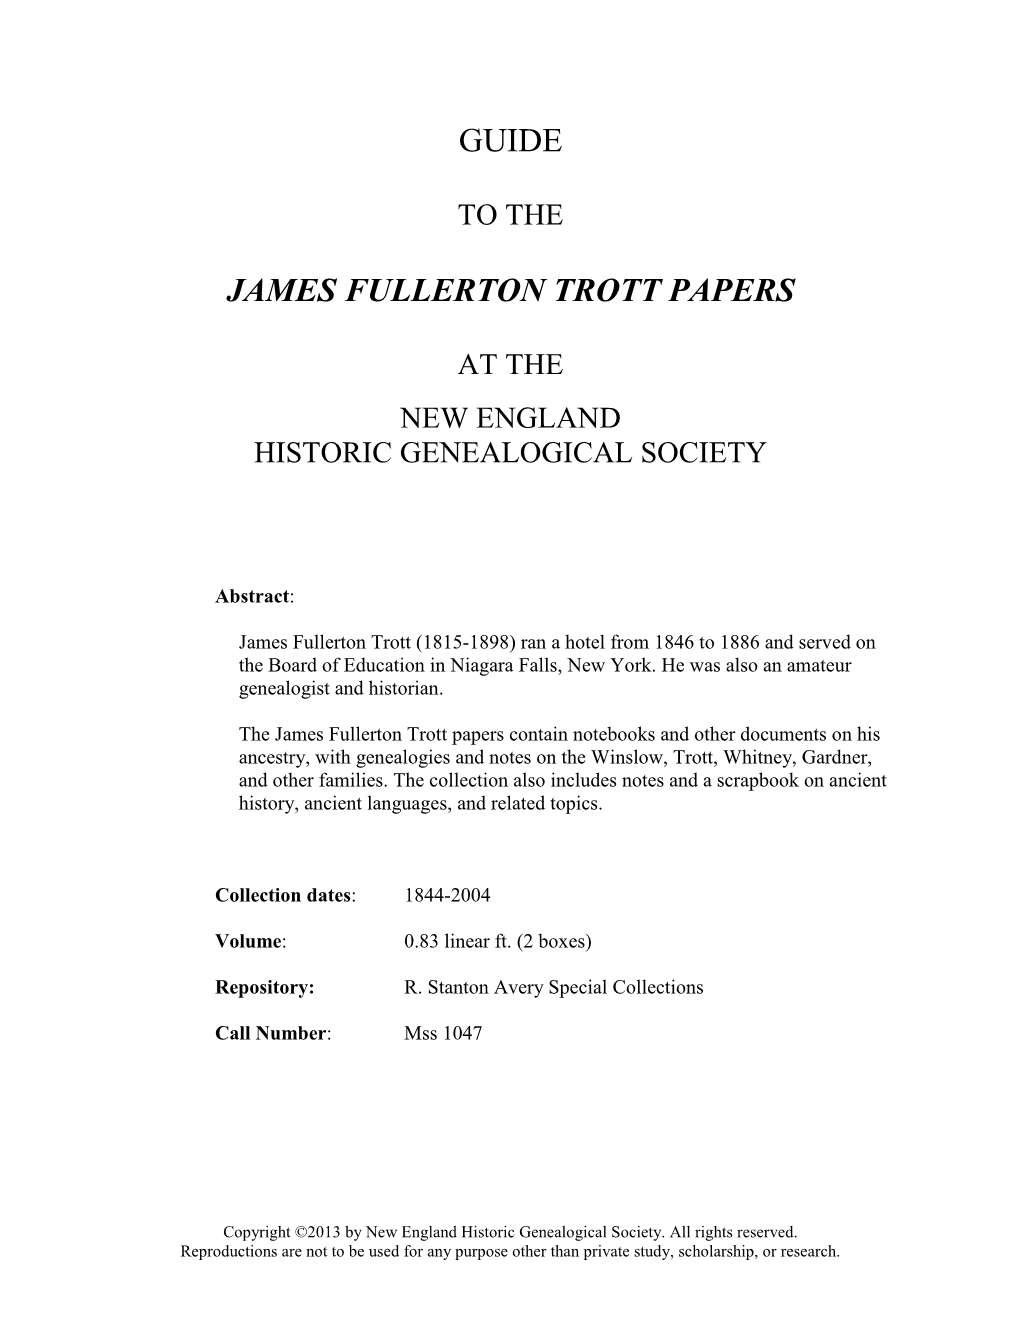 Guide to the James Fullerton Trott Papers